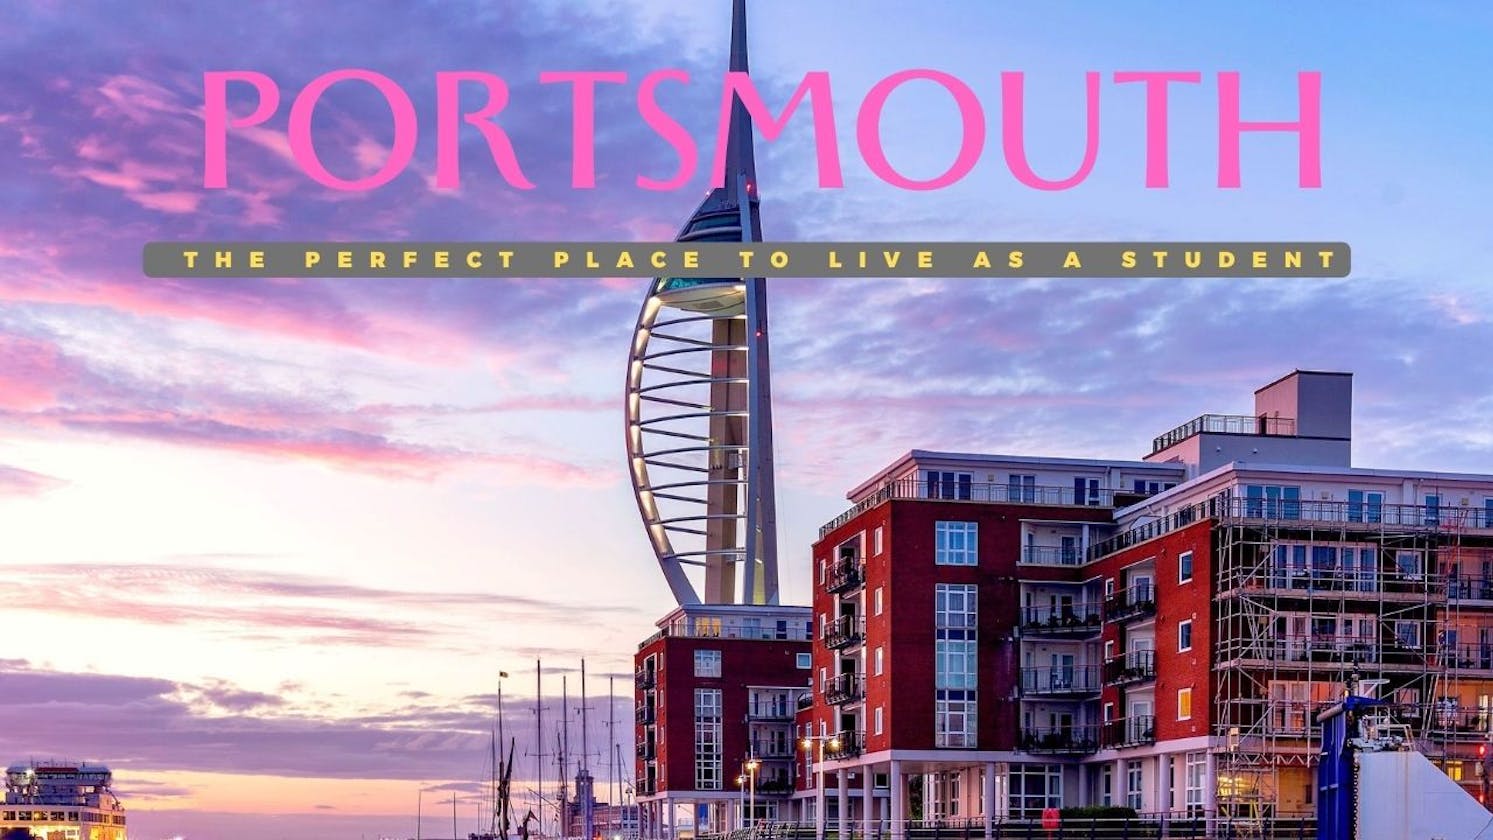 Portsmouth: The perfect place to live as a student